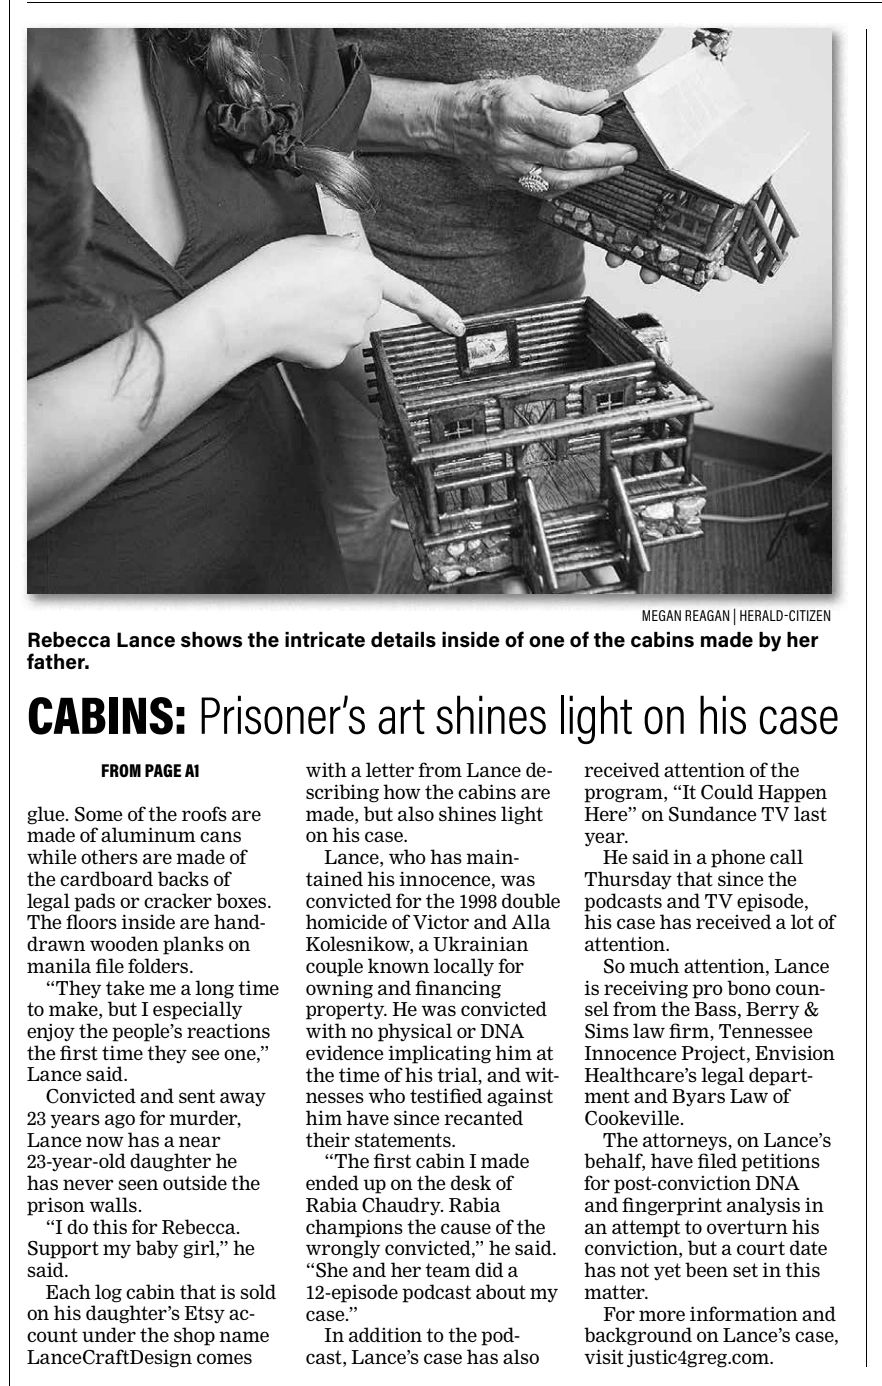 Greg's Cabins In The Herald Citizen